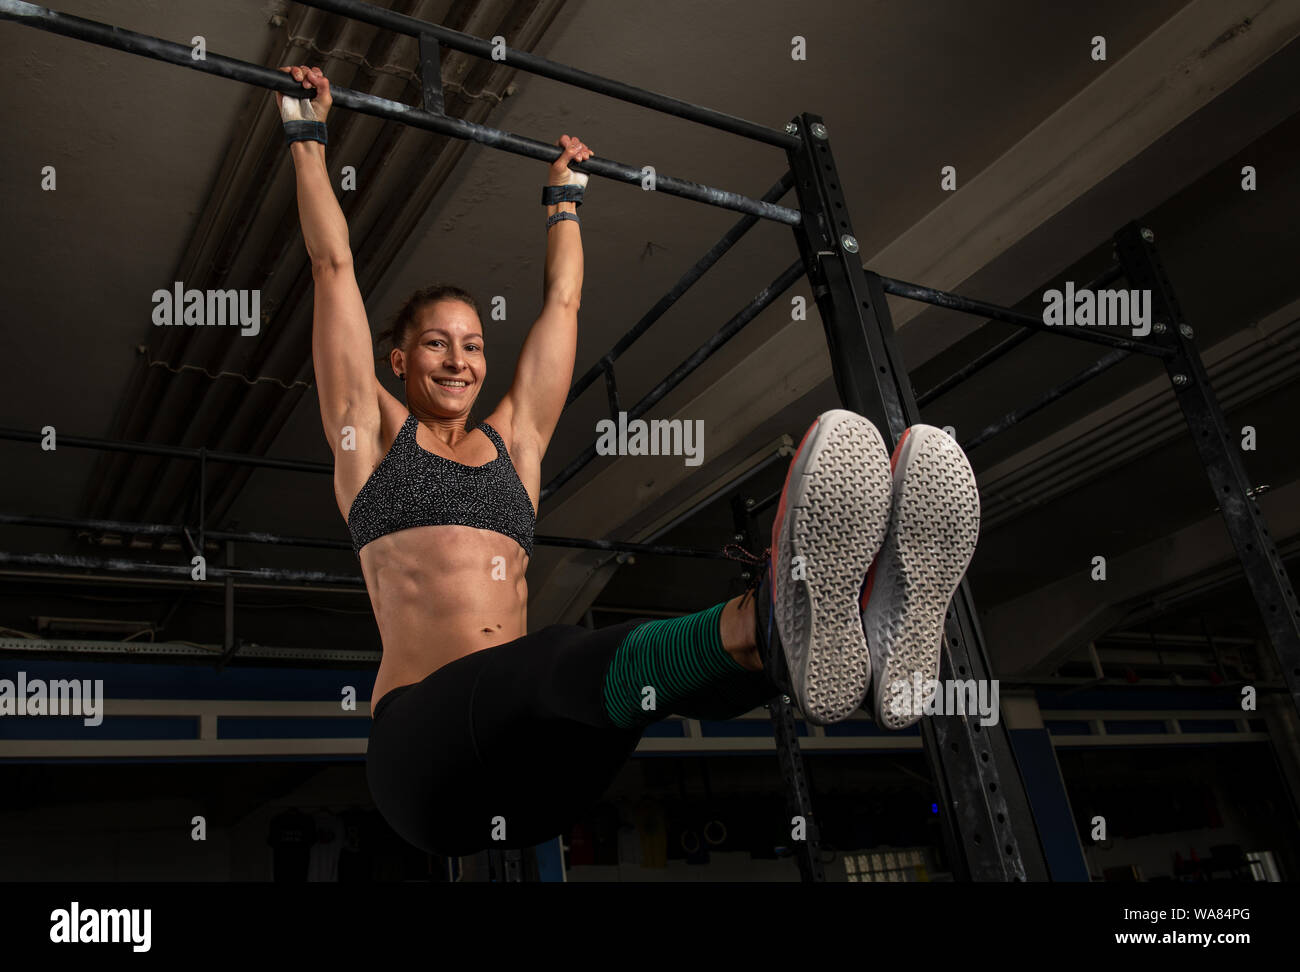 A sporty woman is doing a fitness workout and having fun.The muscular and attractive woman is doing the exercise l sit on the horizontal bar. Stock Photo